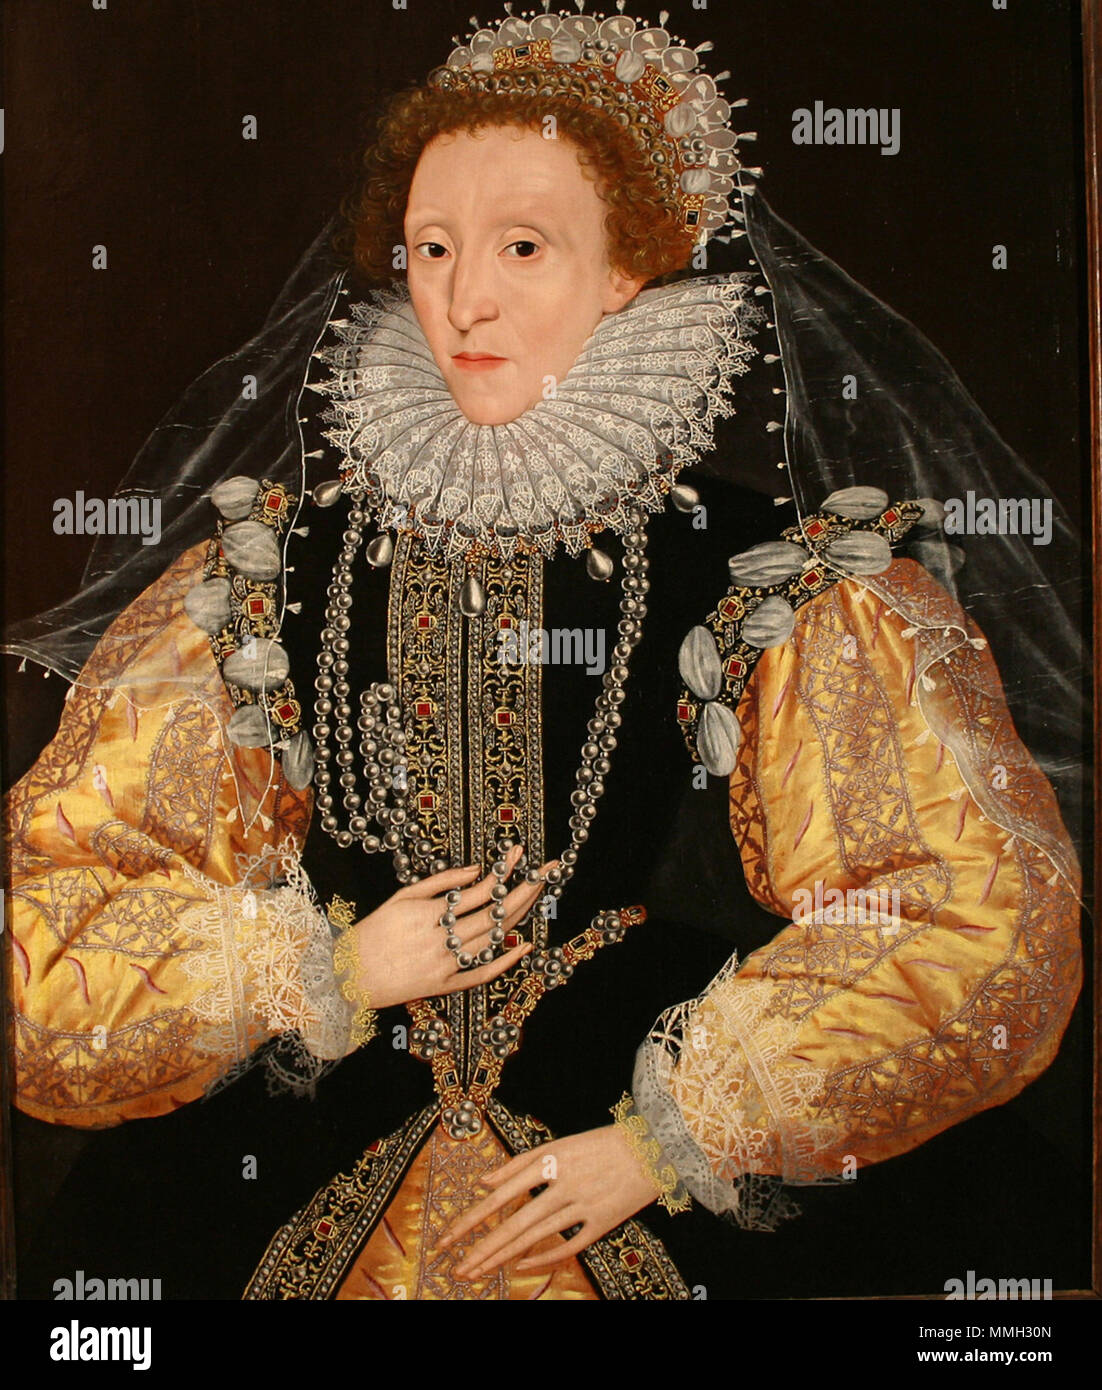 Portrait of Elizabeth I of England. late 1580s.   Attributed to George Gower  (1540–1596)     Alternative names Gower  Description English painter  Date of birth/death circa 1540 1596  Location of birth/death England London  Work period 1570s-1590s  Work location London  Authority control  : Q2126008 VIAF:?65226012 ISNI:?0000 0000 8251 2456 ULAN:?500032228 LCCN:?nr00039827 GND:?135583837 WorldCat George Gower Elizabeth I Drewe Portrait Stock Photo